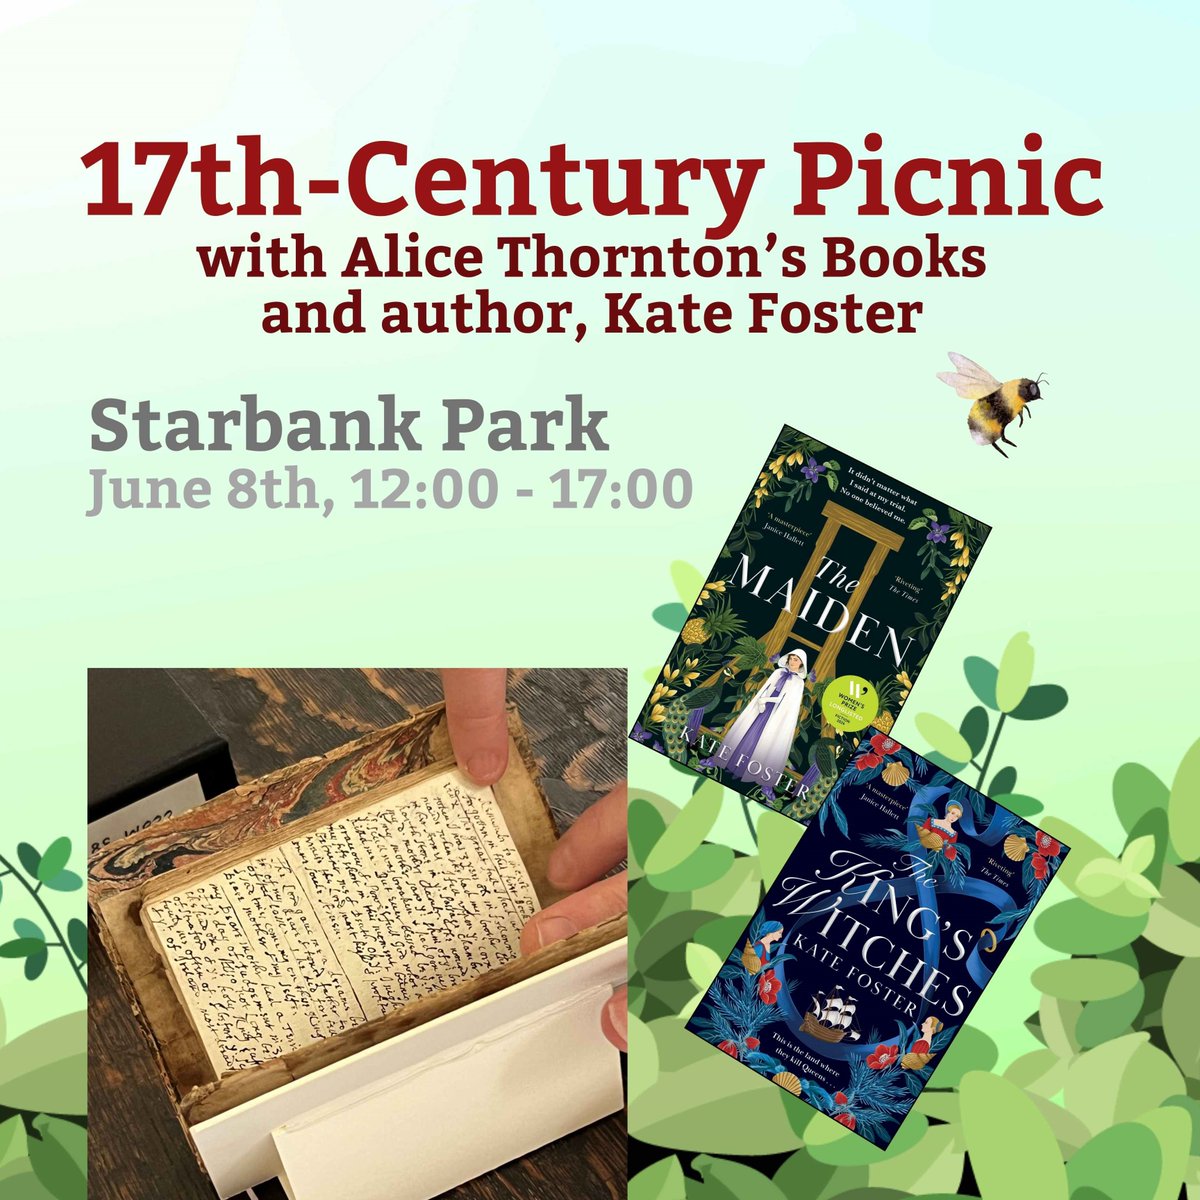 On June 8th, pack a picnic for a Thornton-themed event in @StarbankPark! 🌞Guided walks 🦋Free talks 🍐Craft & creative writing 🌿Book stall 🌸Thornton Books in conversation with @KateFosterMedia, author of 'The Maiden', & forthcoming 'The King's Witches' alicethorntonpicnic.eventbrite.co.uk